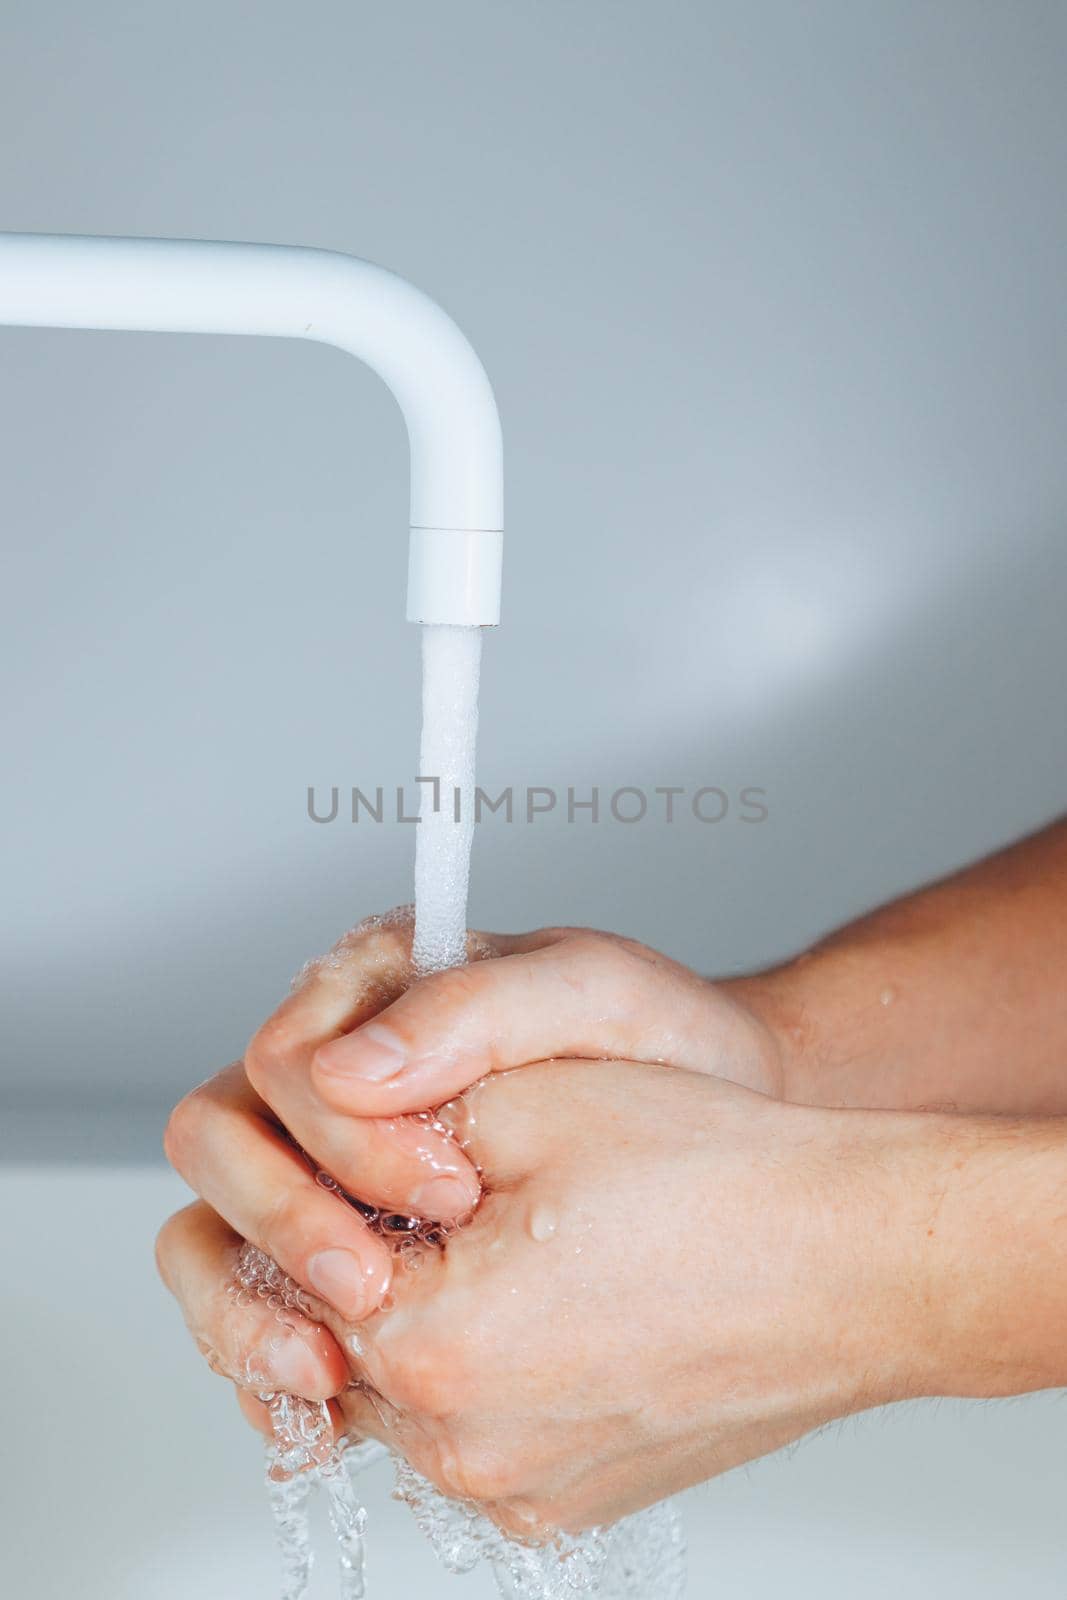 hands washing under the faucet in a bathroom